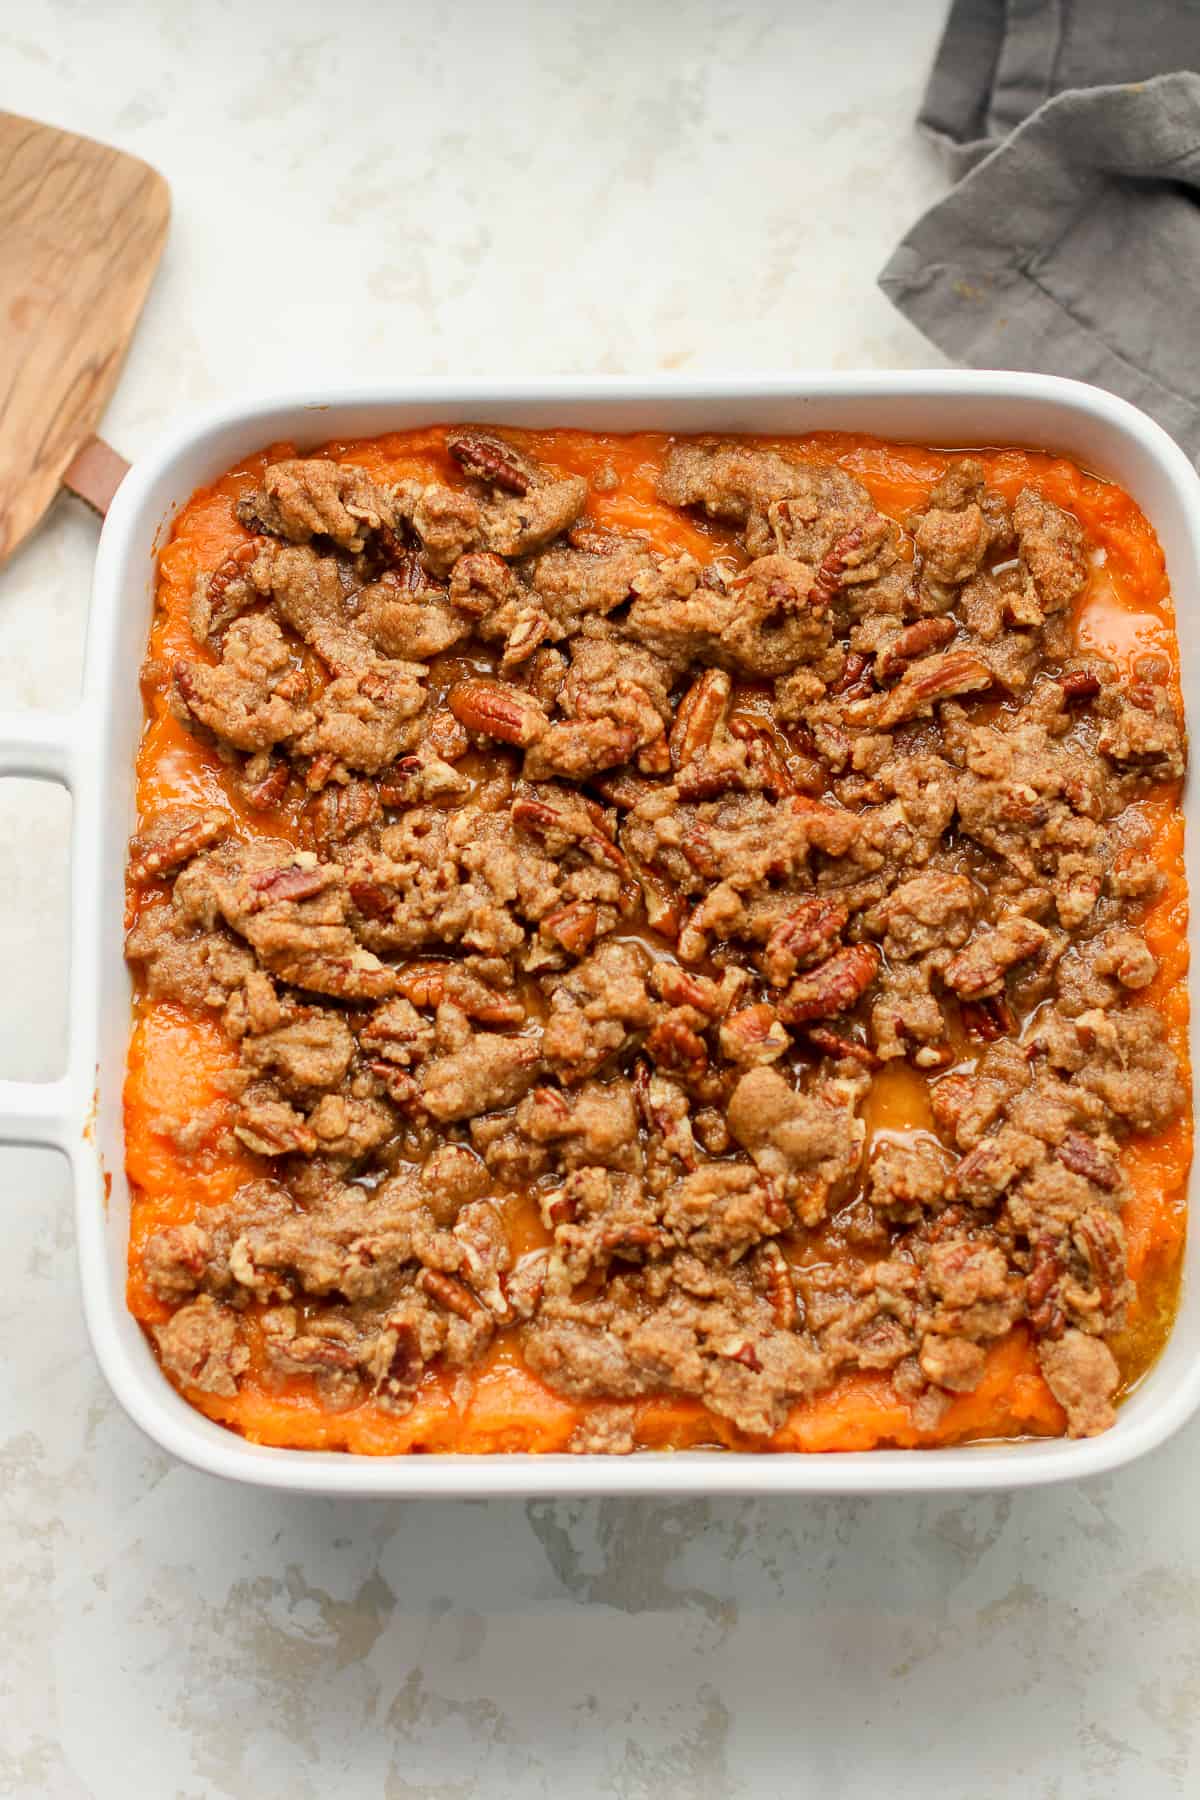 A square dish with a sweet potato and brown sugar crumble.